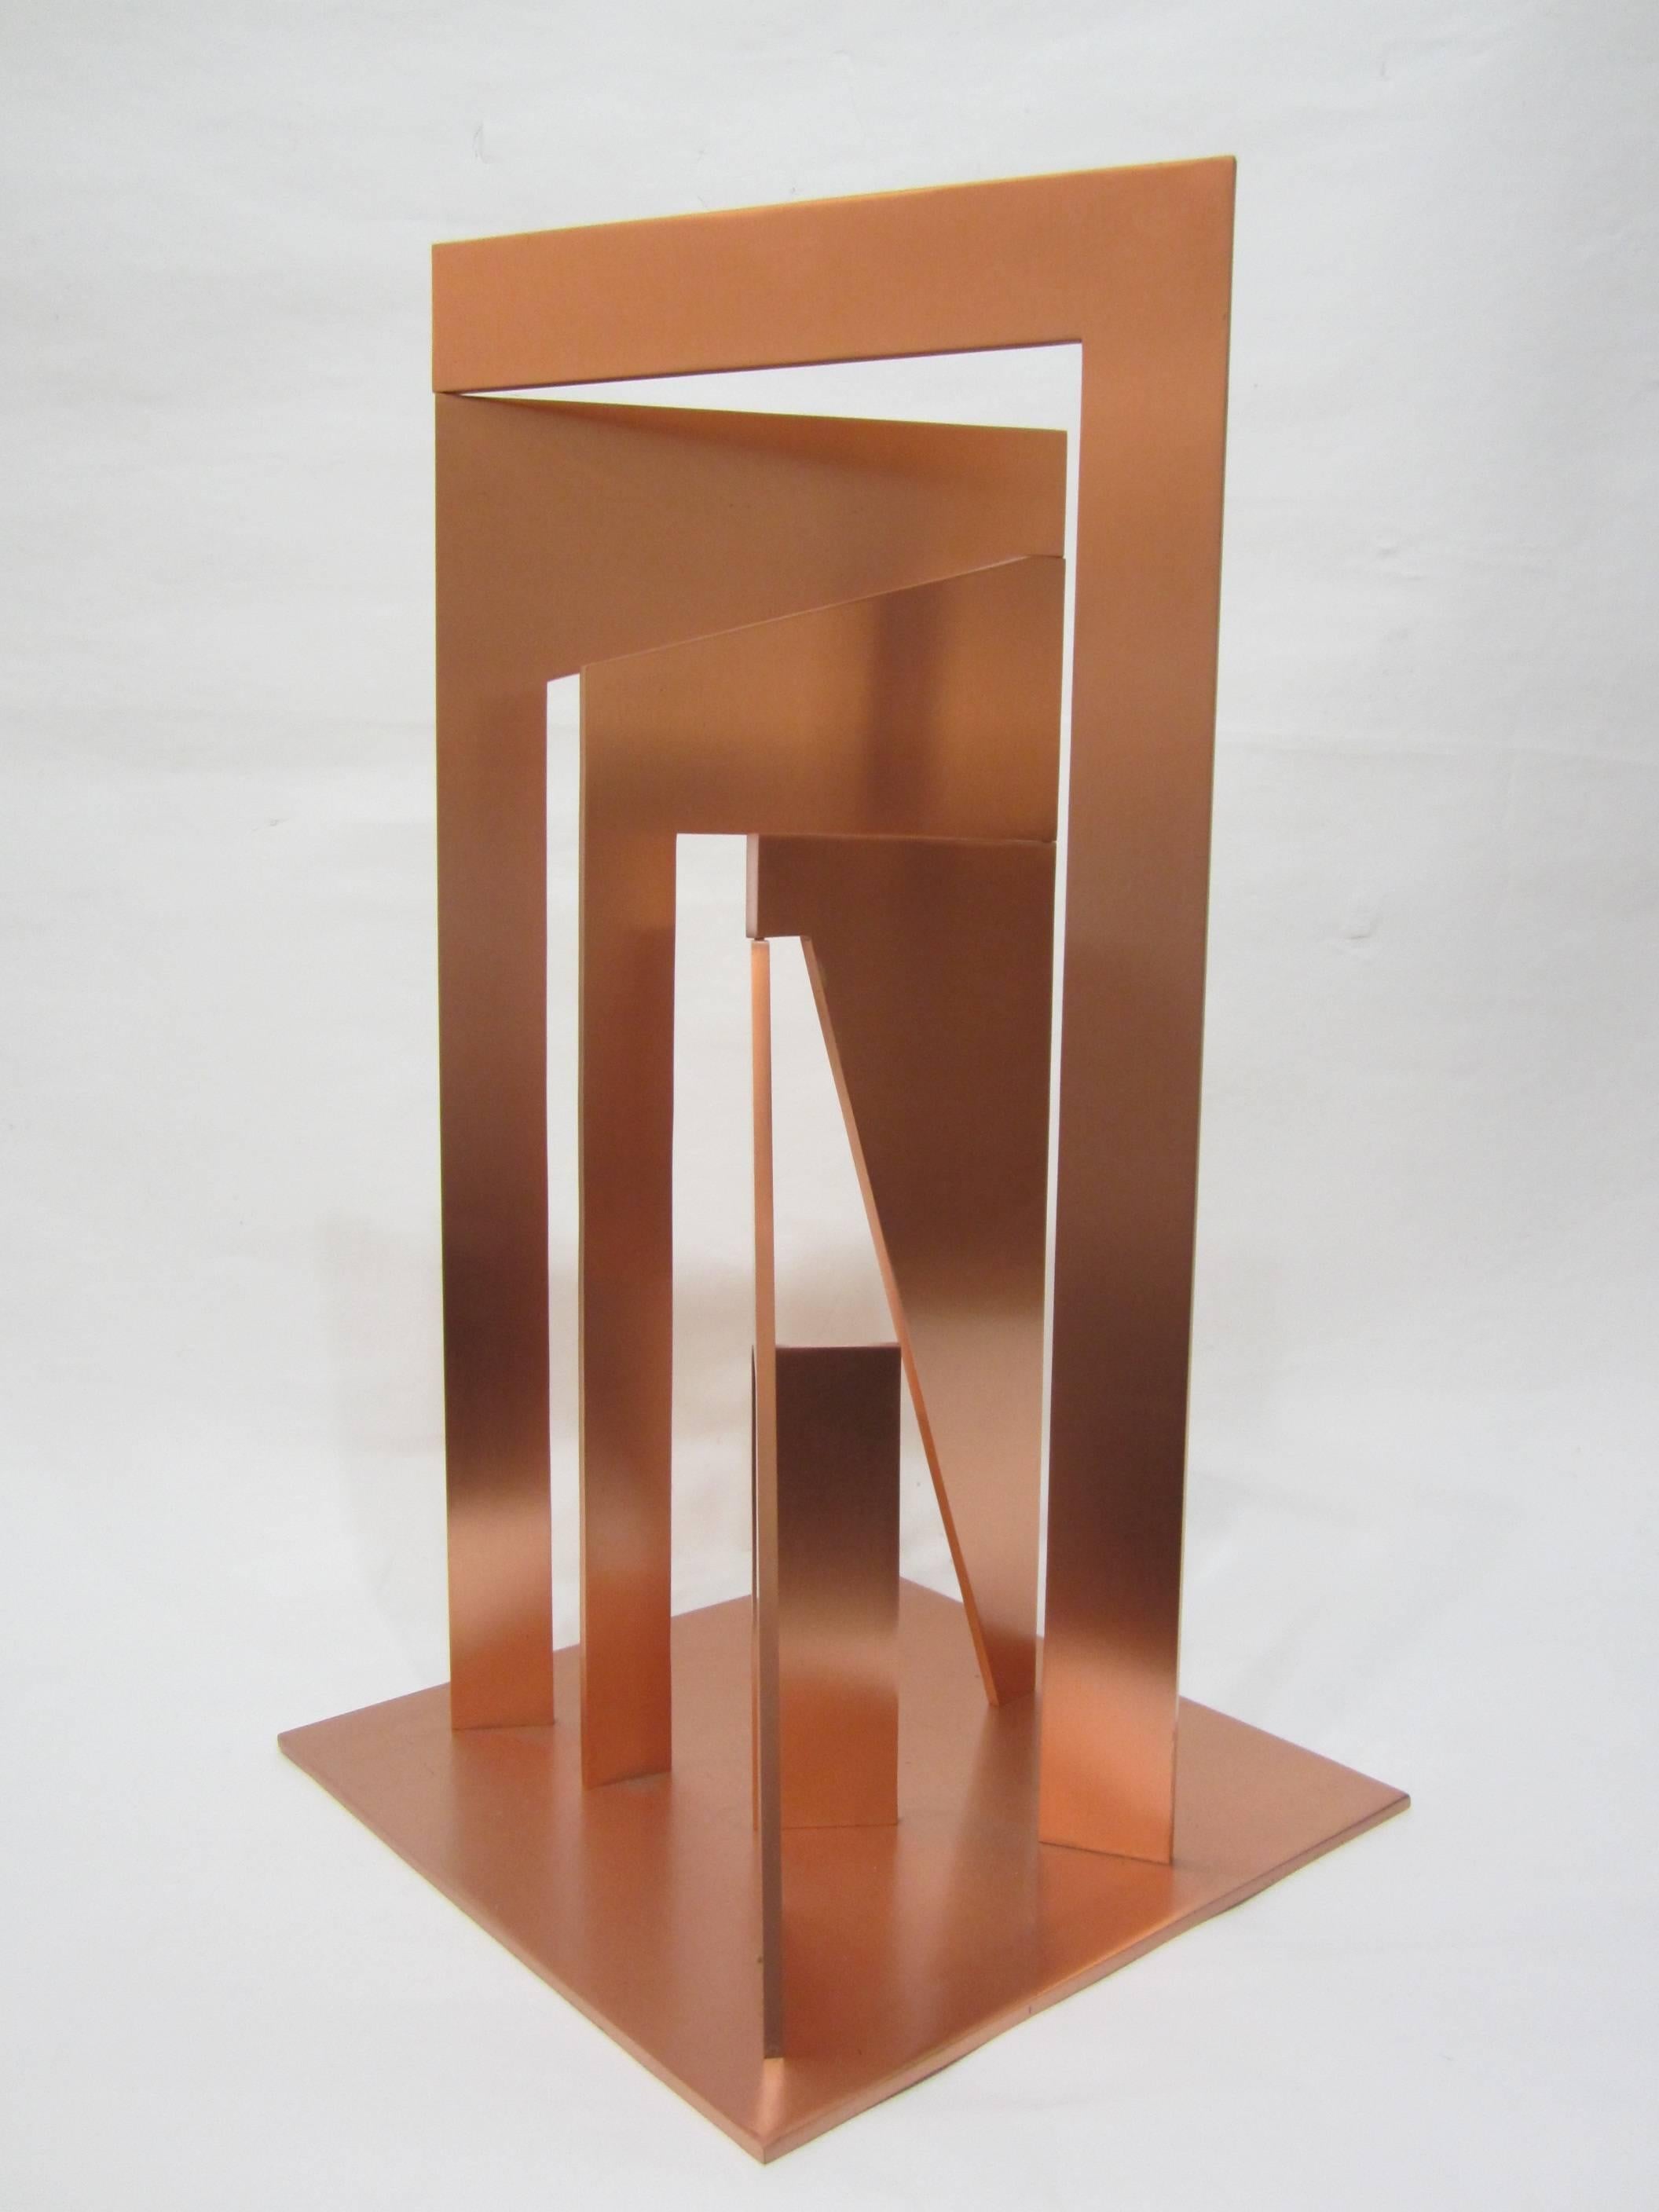 Christopher Georgesco Copper Sculpture Titled 